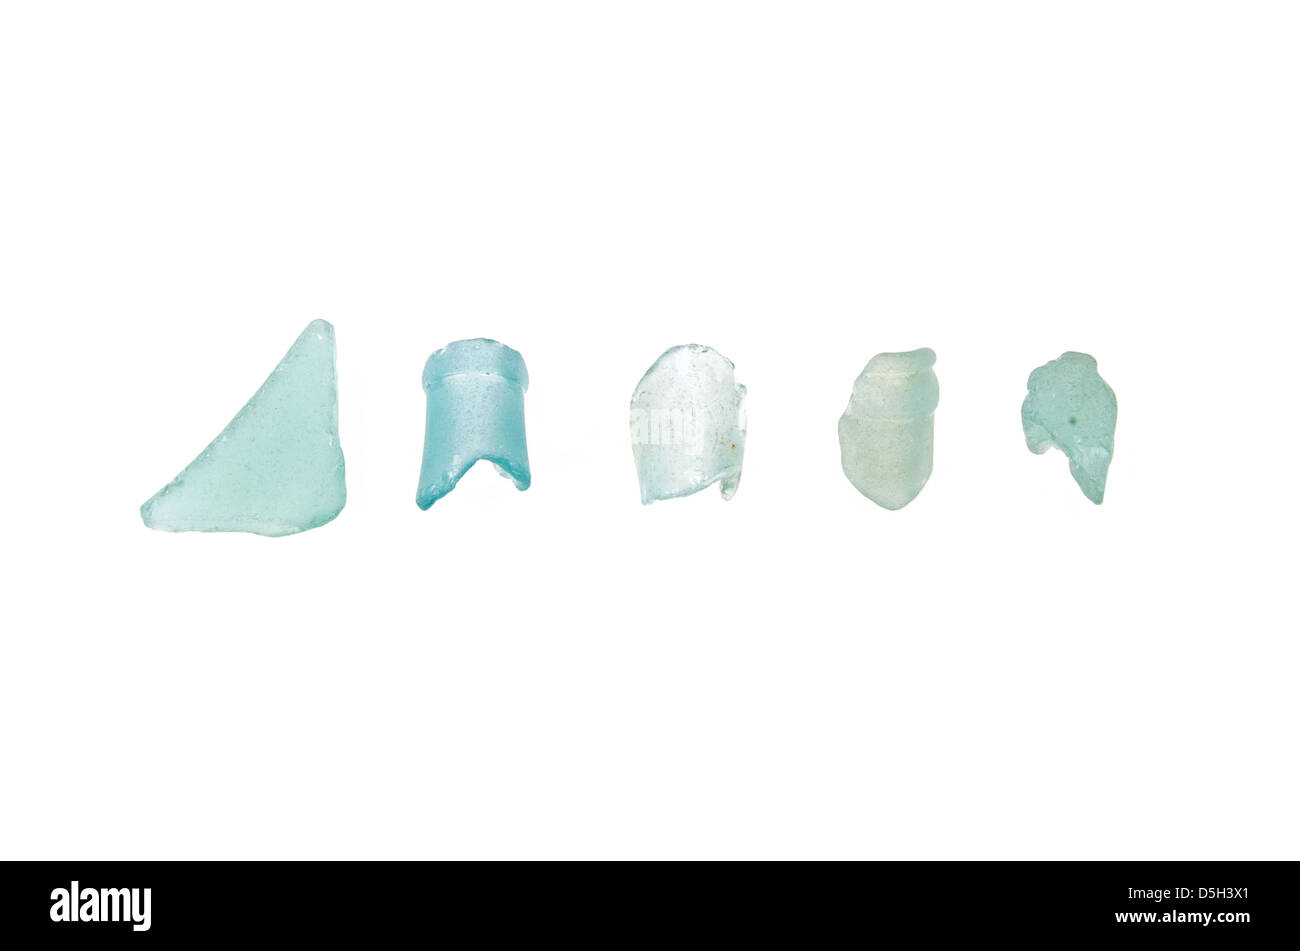 Five pieces of aqua beach glass on a white background. Stock Photo